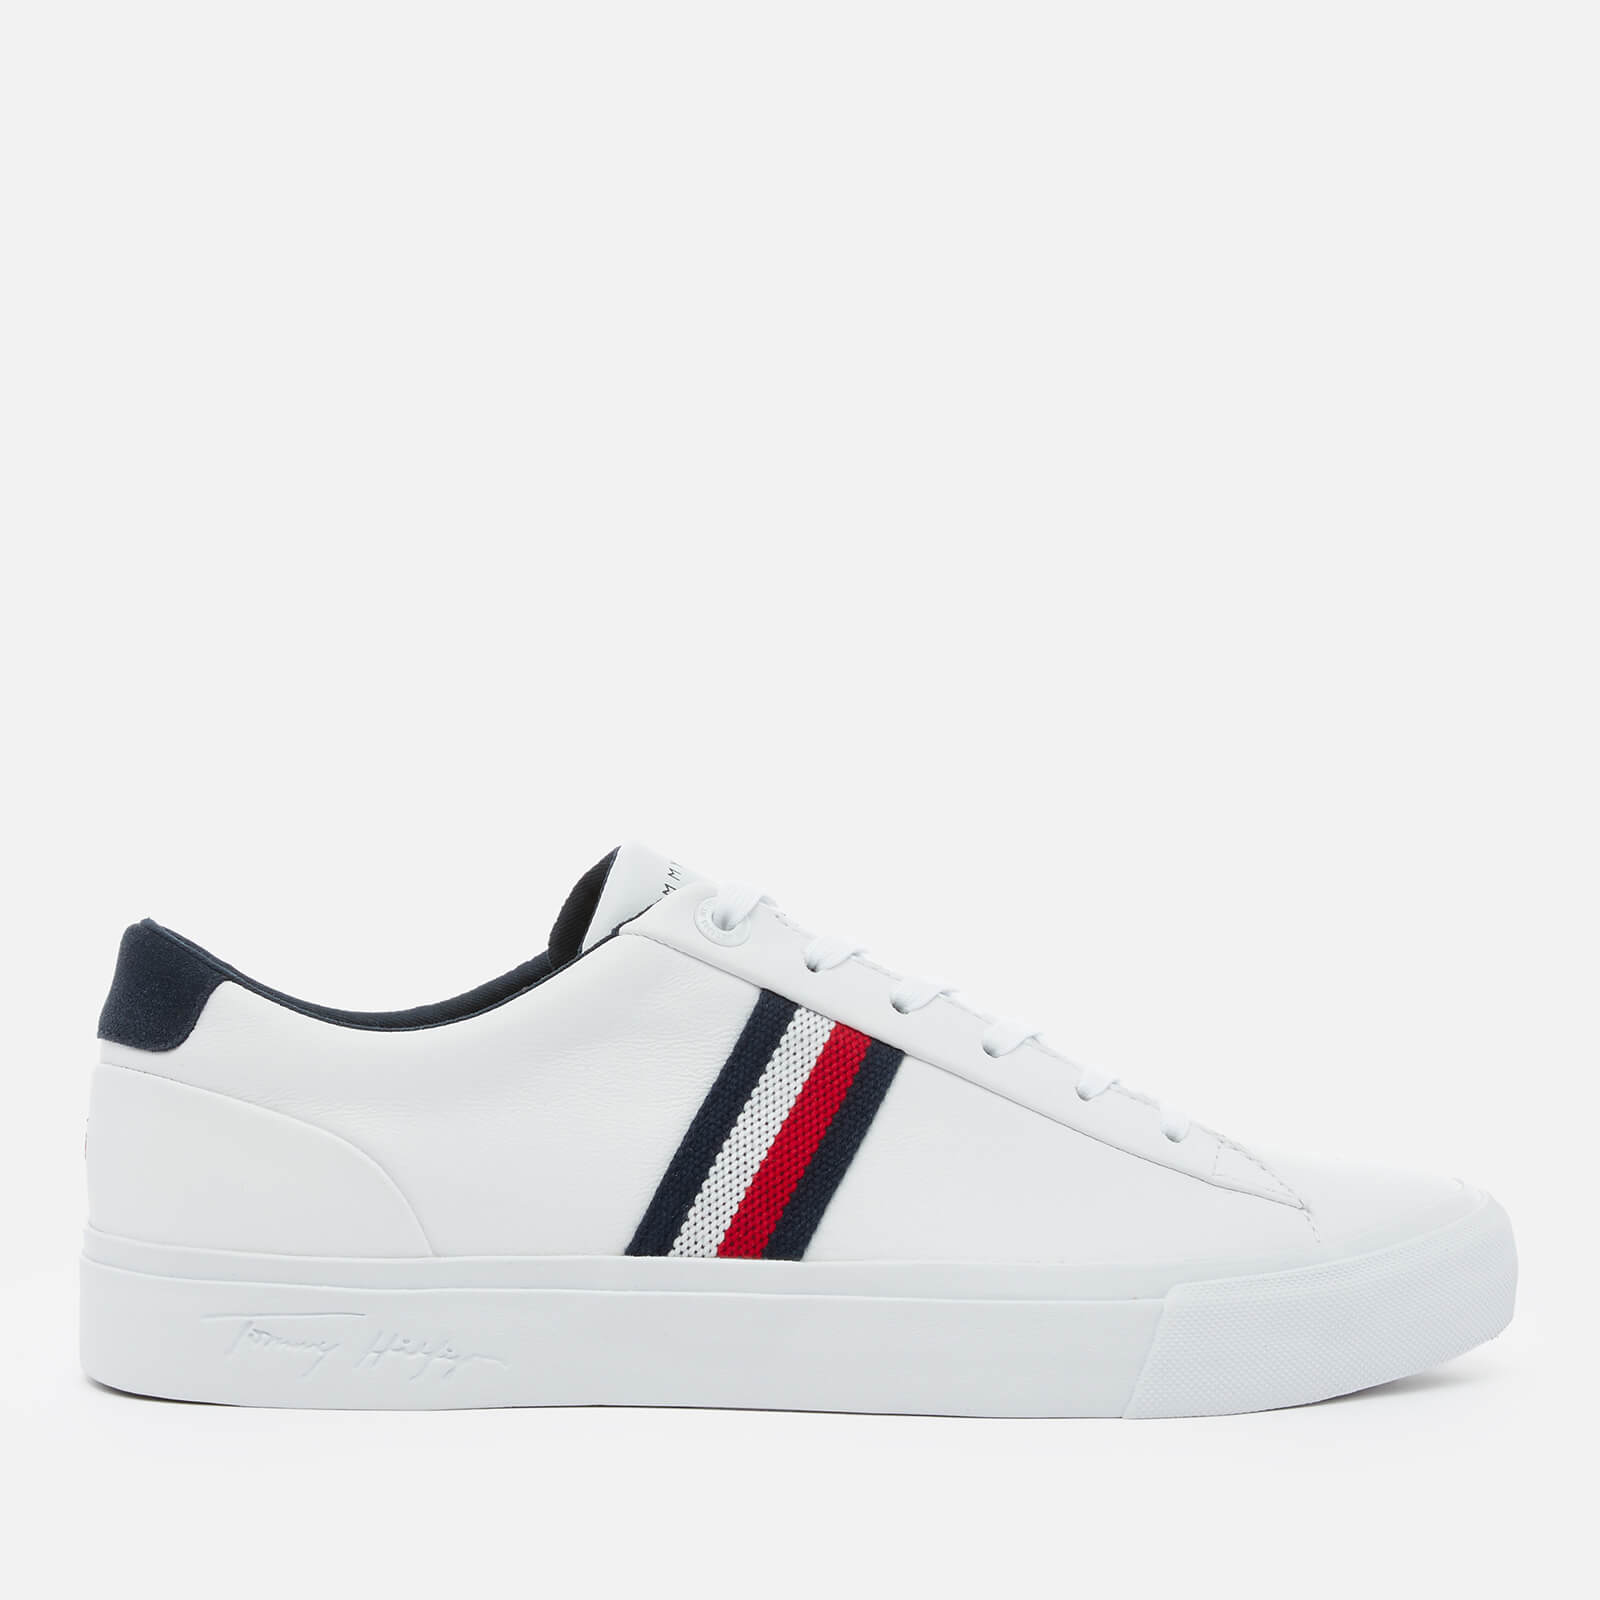 Tommy Hilfiger Men's Corporate Leather Low Top Trainers - White - UK 10.5